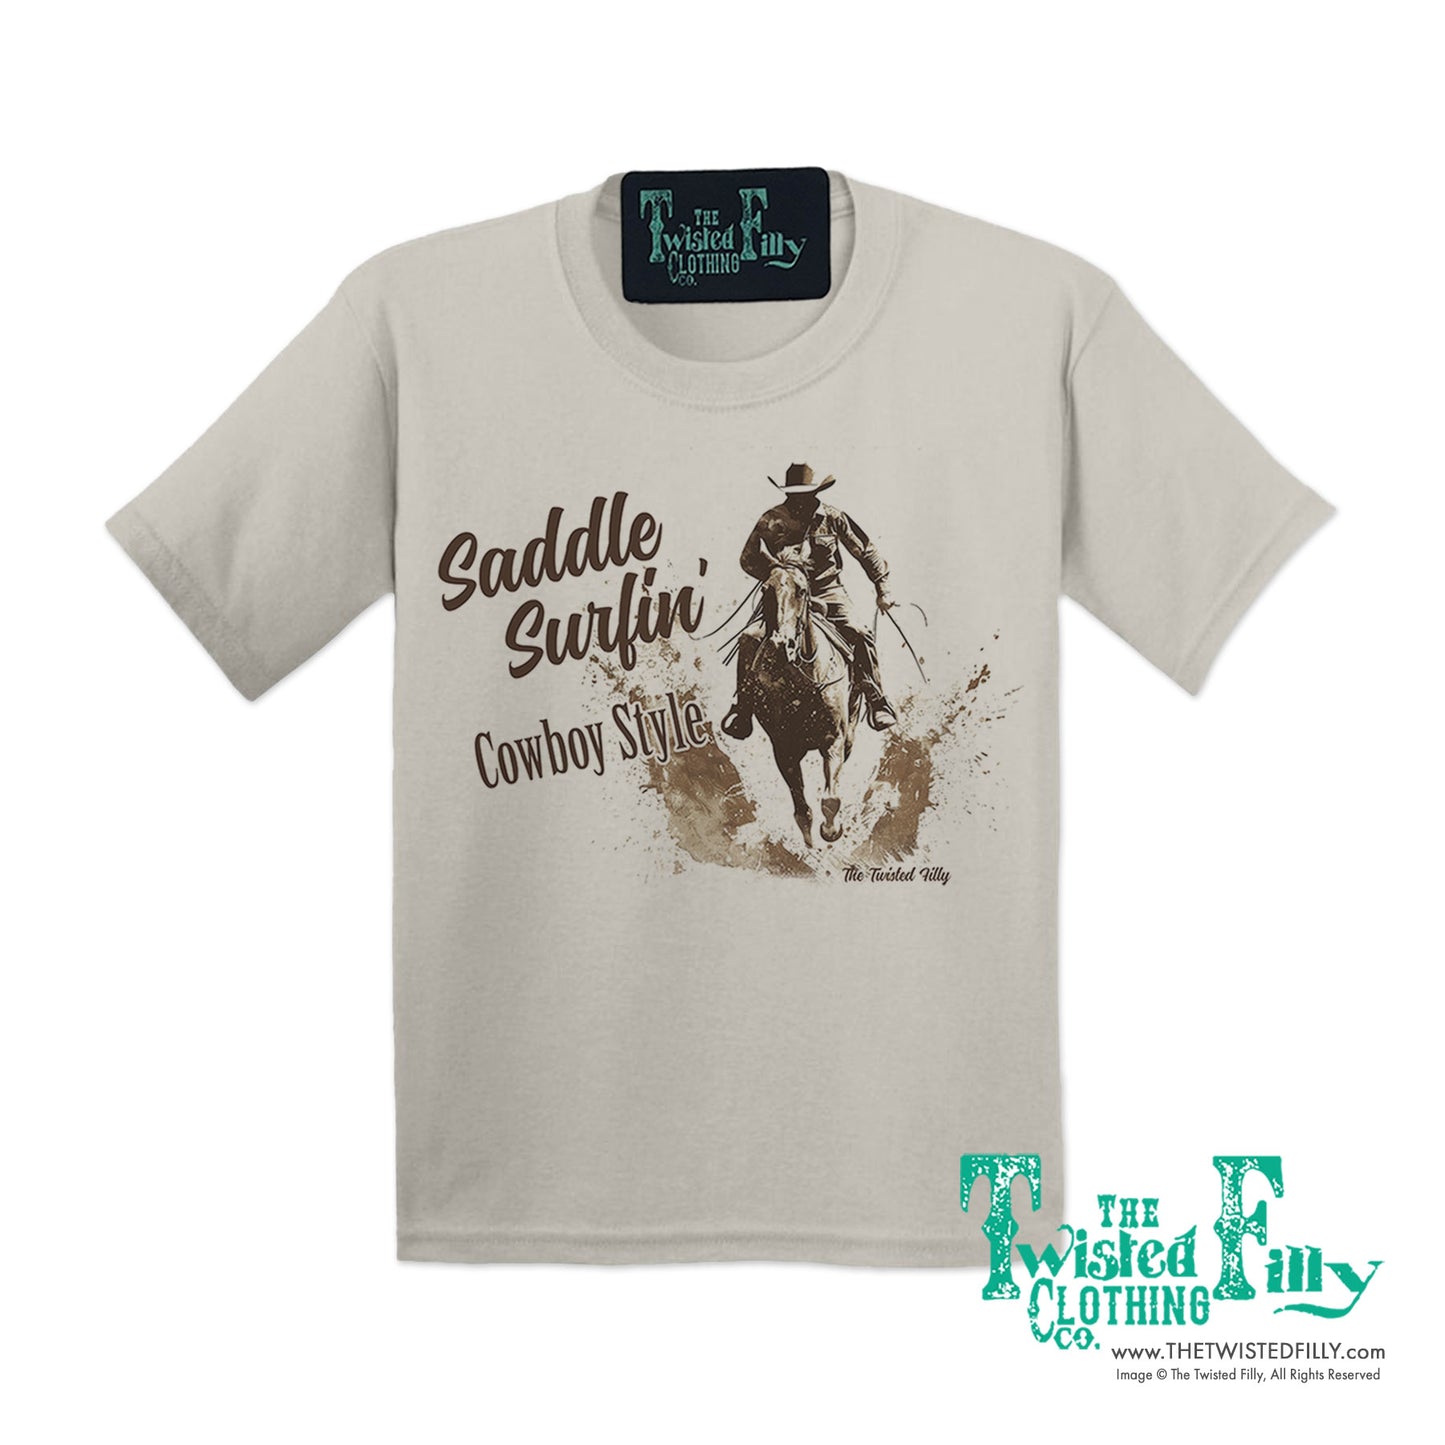 Saddle Surfin' Cowboy Style - S/S Boys Youth Tee - Assorted Colors